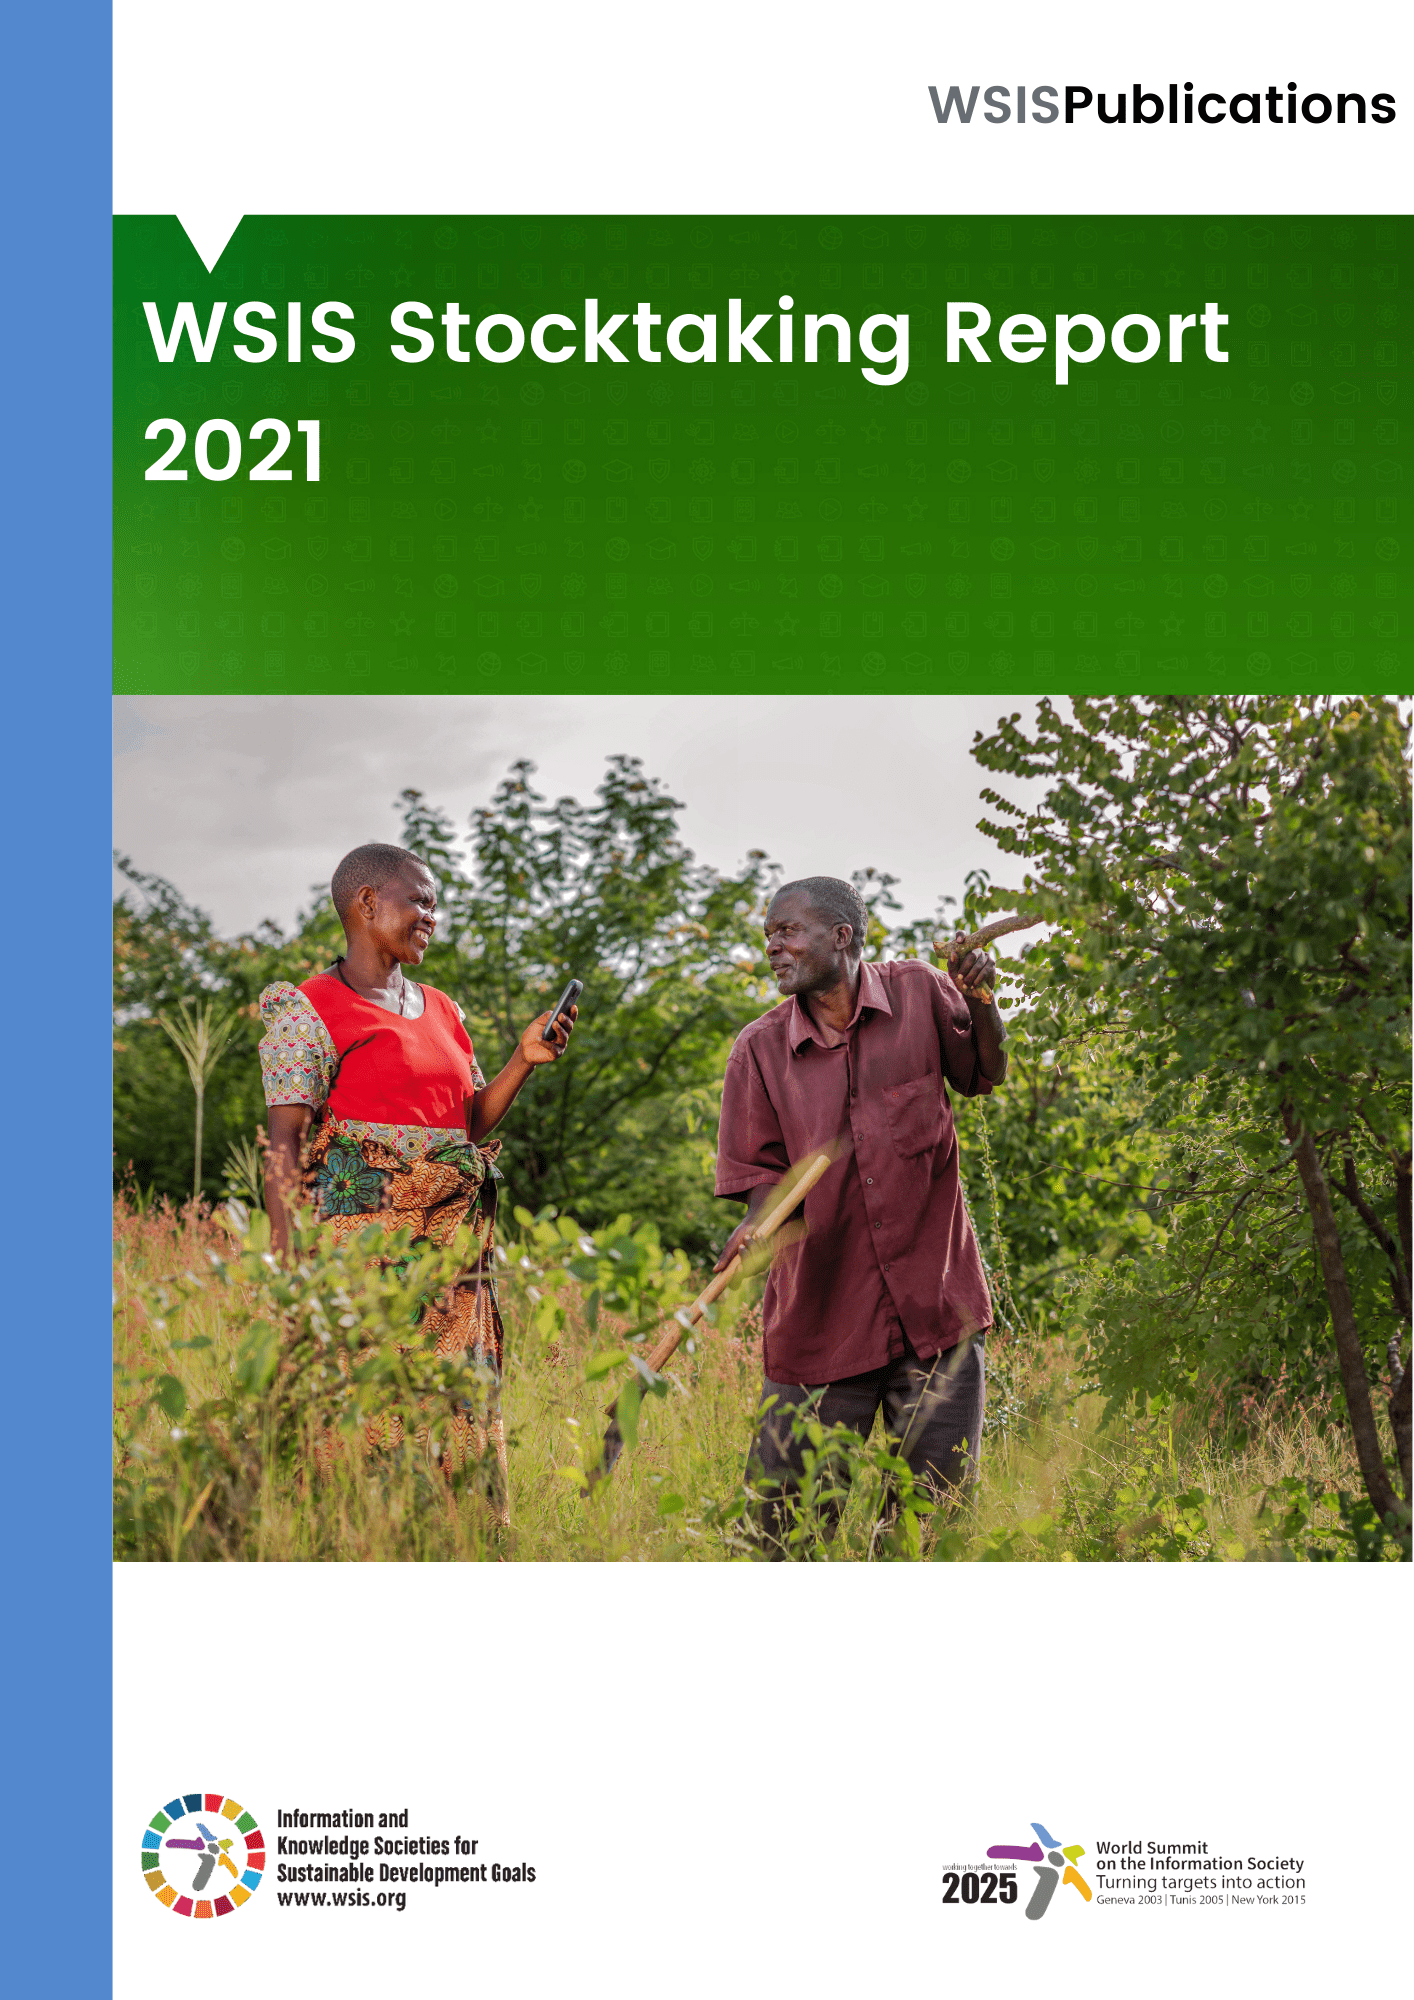 Howly Bh Clg Girl Mms - WSIS Stocktaking 2021 Global Report